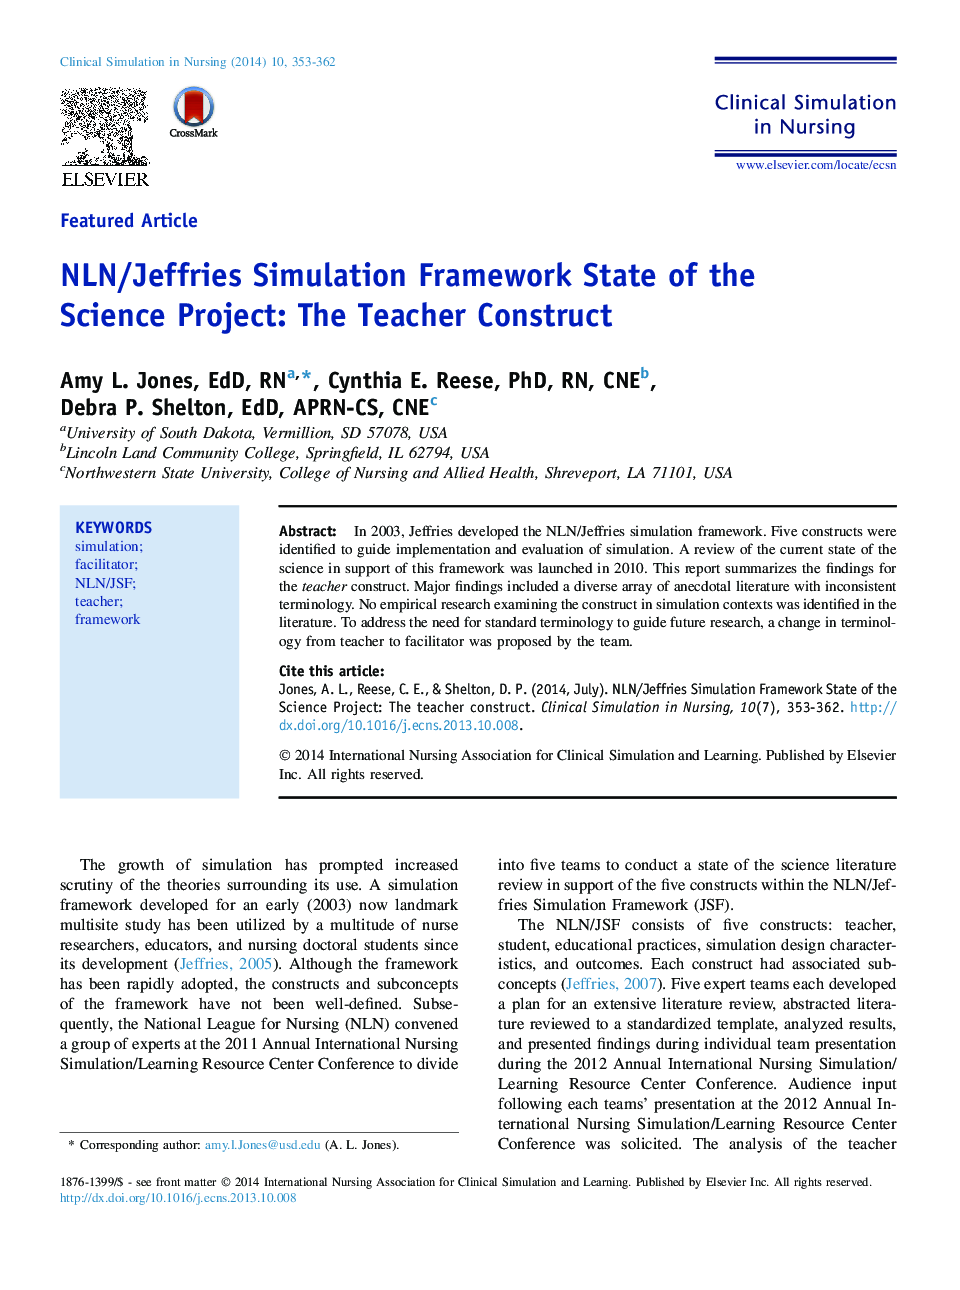 NLN/Jeffries Simulation Framework State of the Science Project: The Teacher Construct